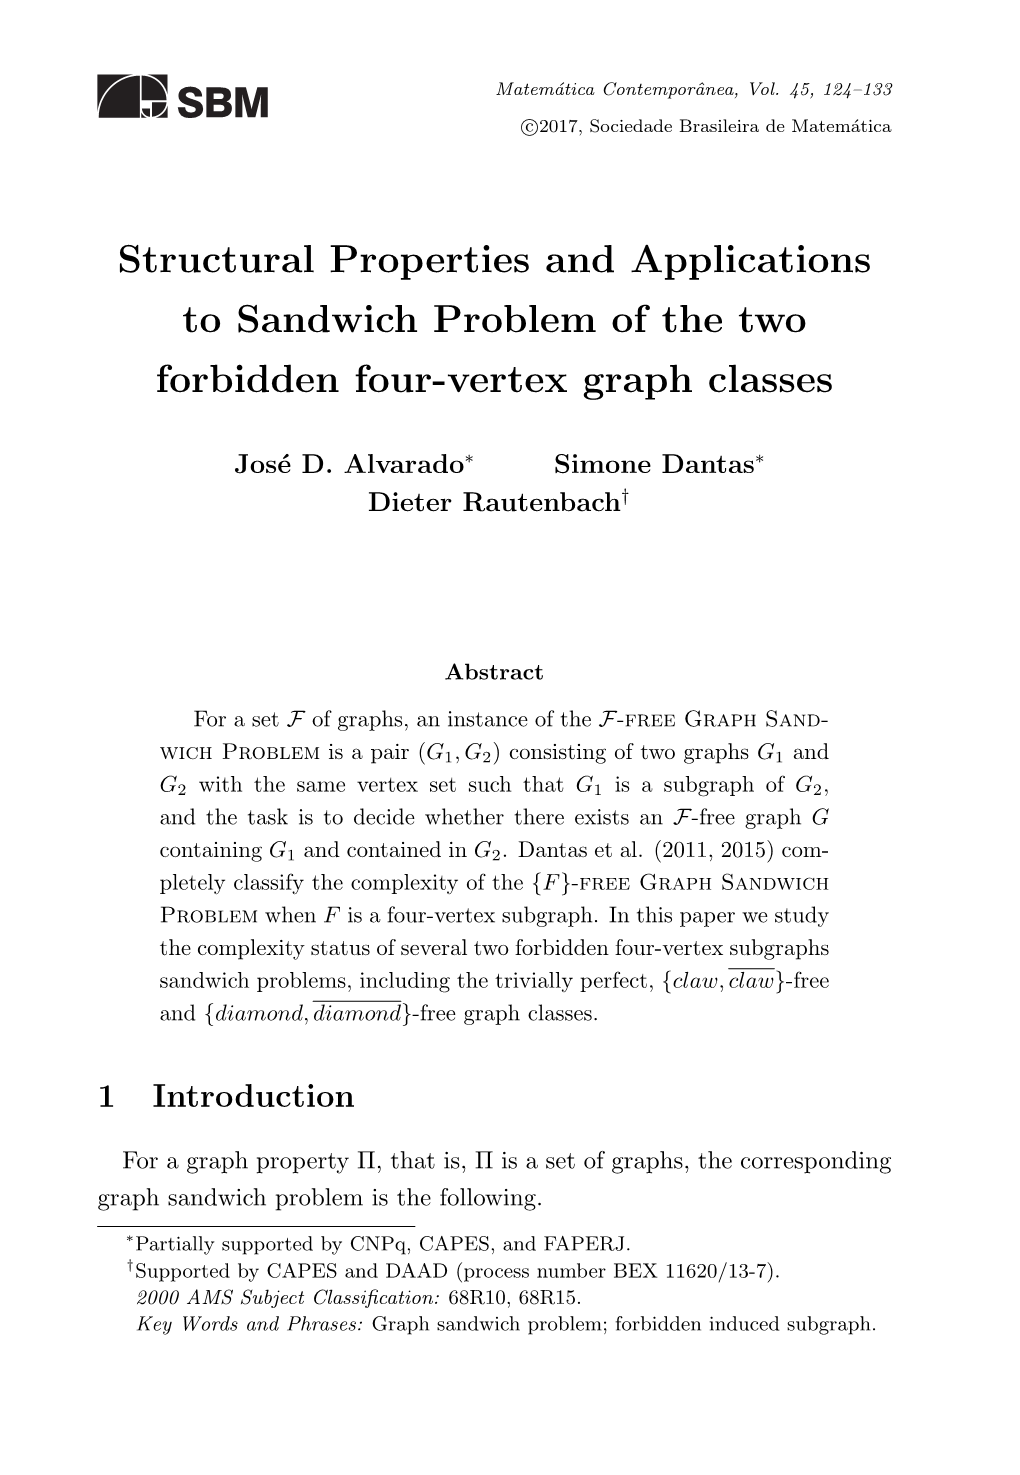 Structural Properties and Applications to Sandwich Problem of the Two Forbidden Four-Vertex Graph Classes